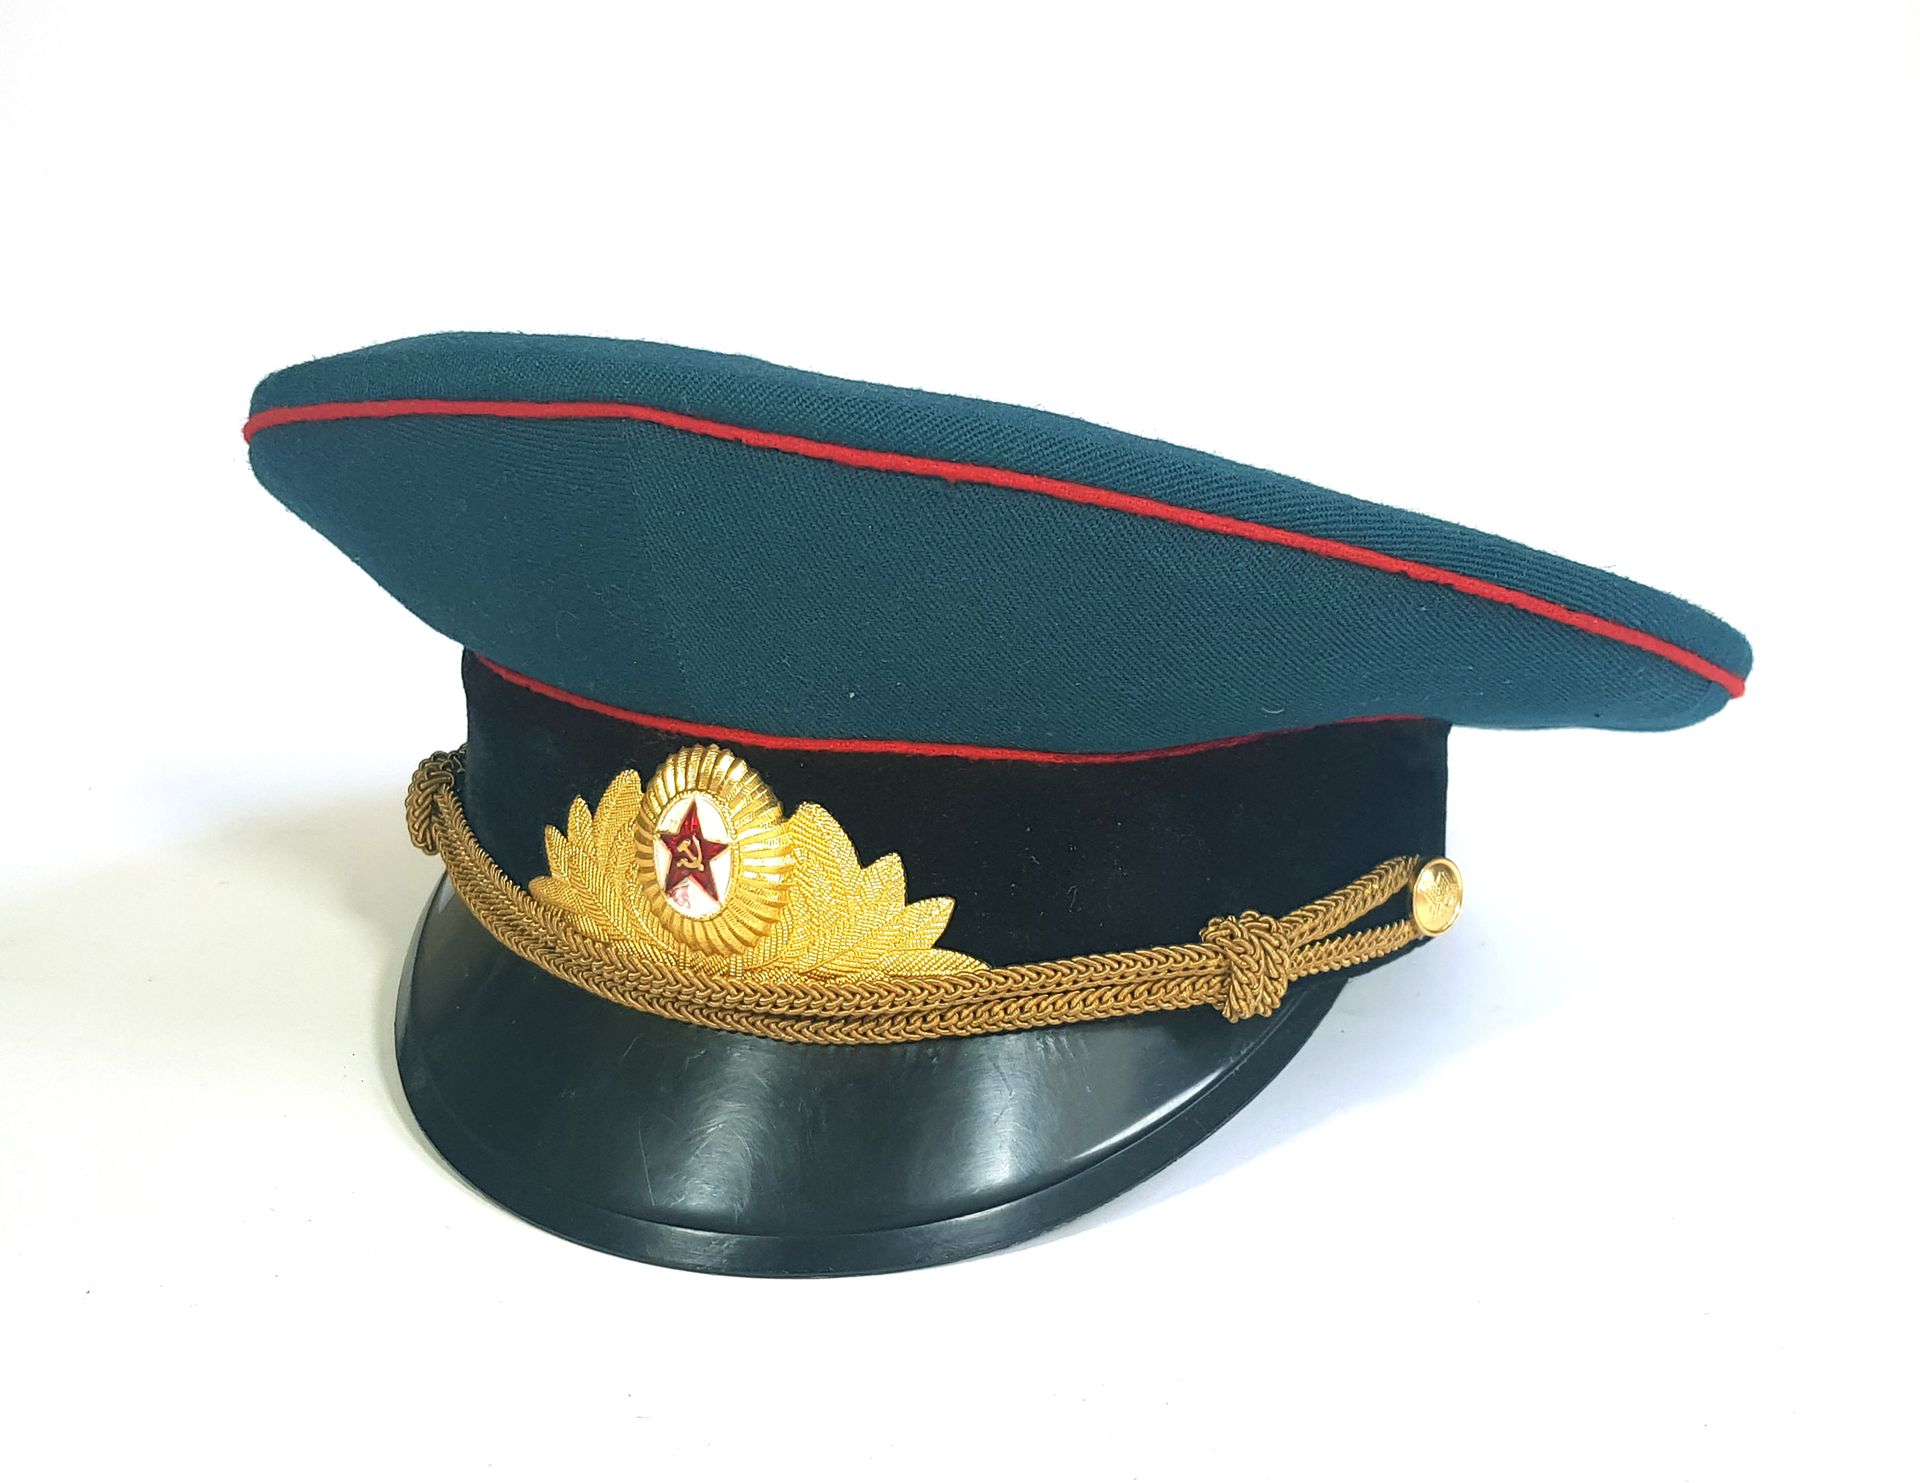 Null фуражка советской армии

Soviet army officer's ceremonial cap, label inside&hellip;